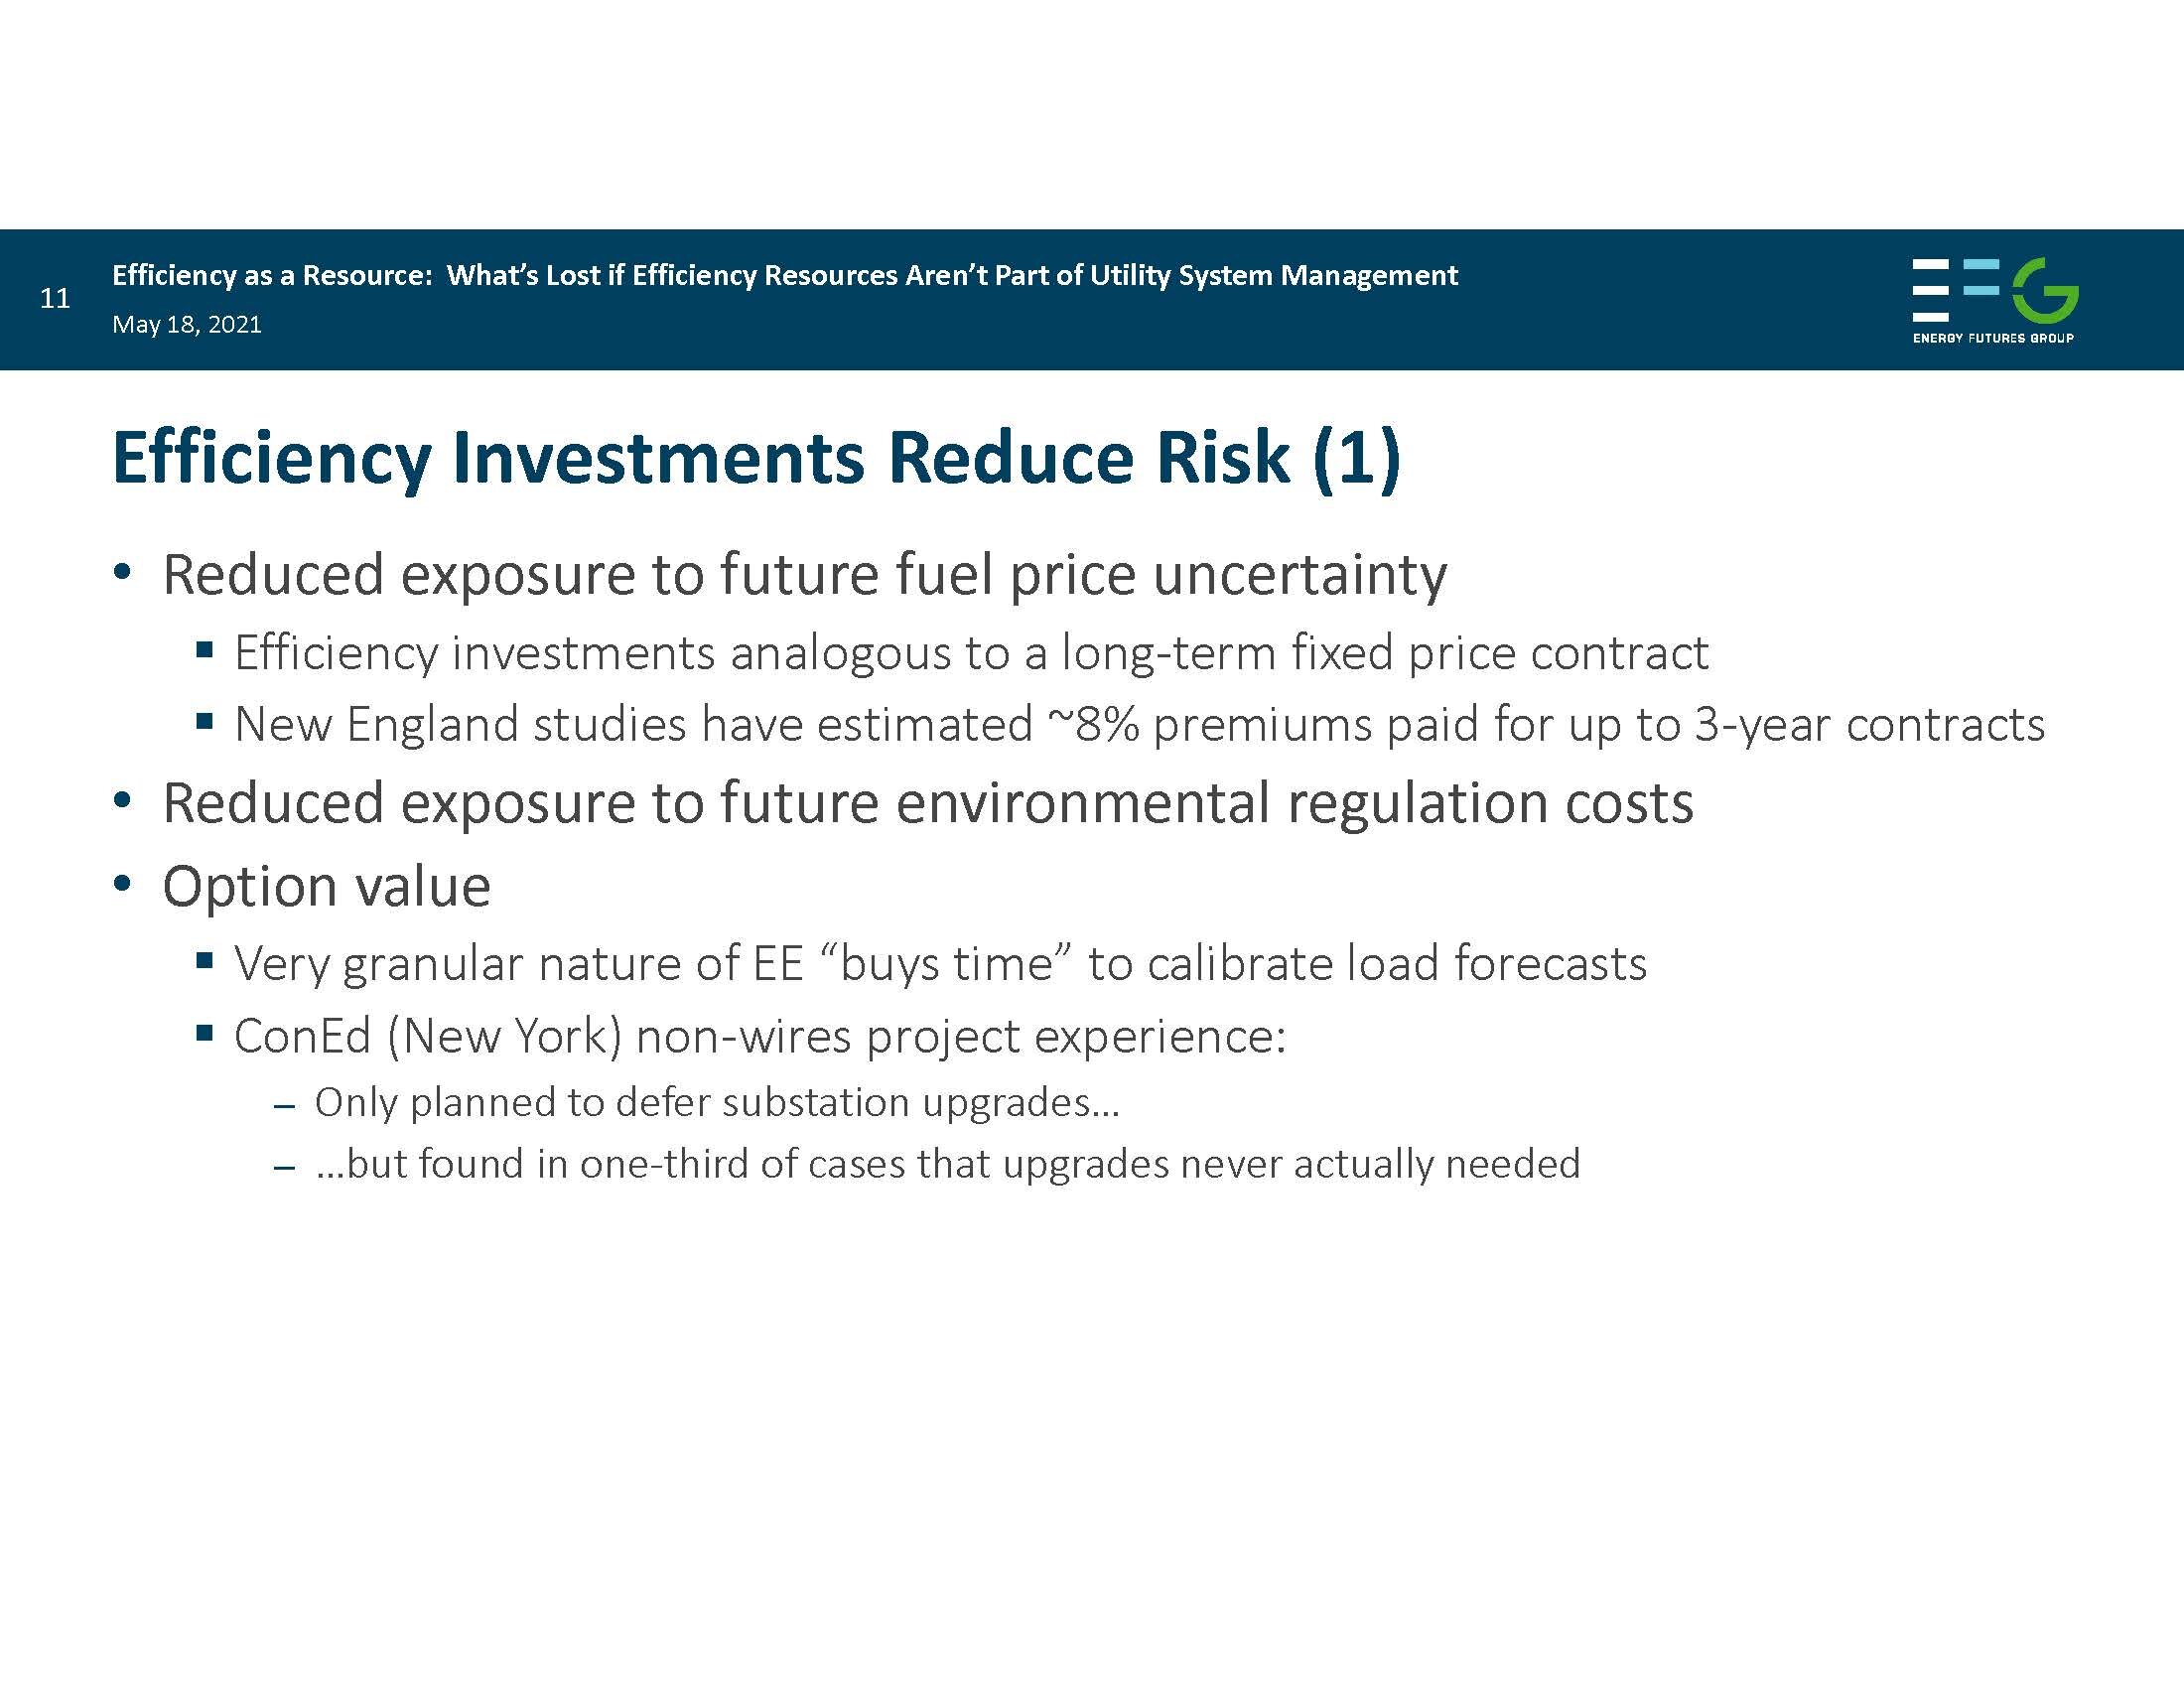 Energy Efficiency as a Resource Chris Neme Energy Futures_Page_11.jpg